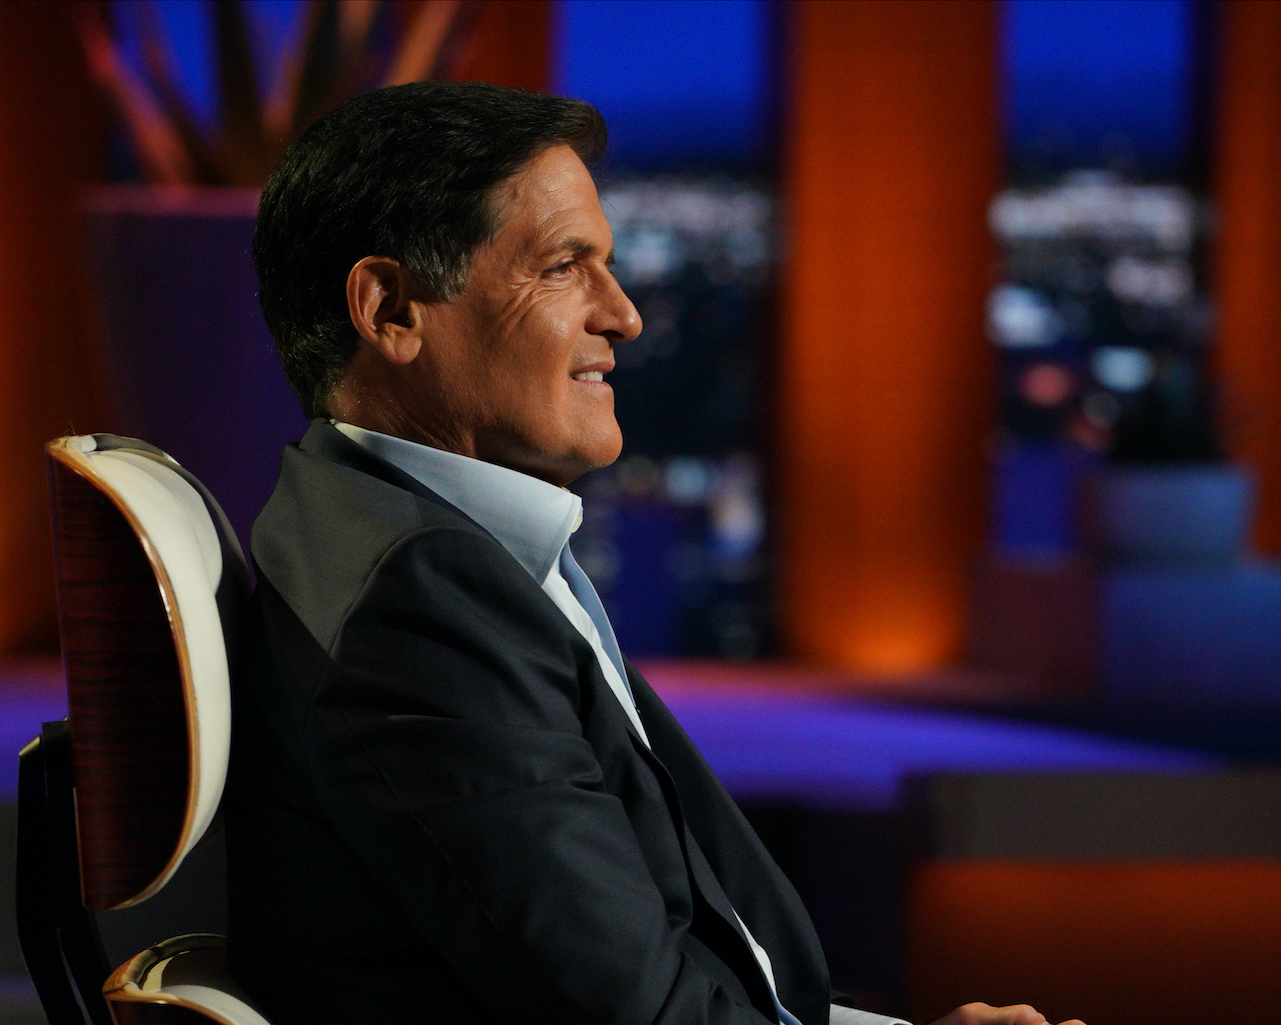 Mark Cuban sits on the panel of 'Shark Tank' in a blue jacket